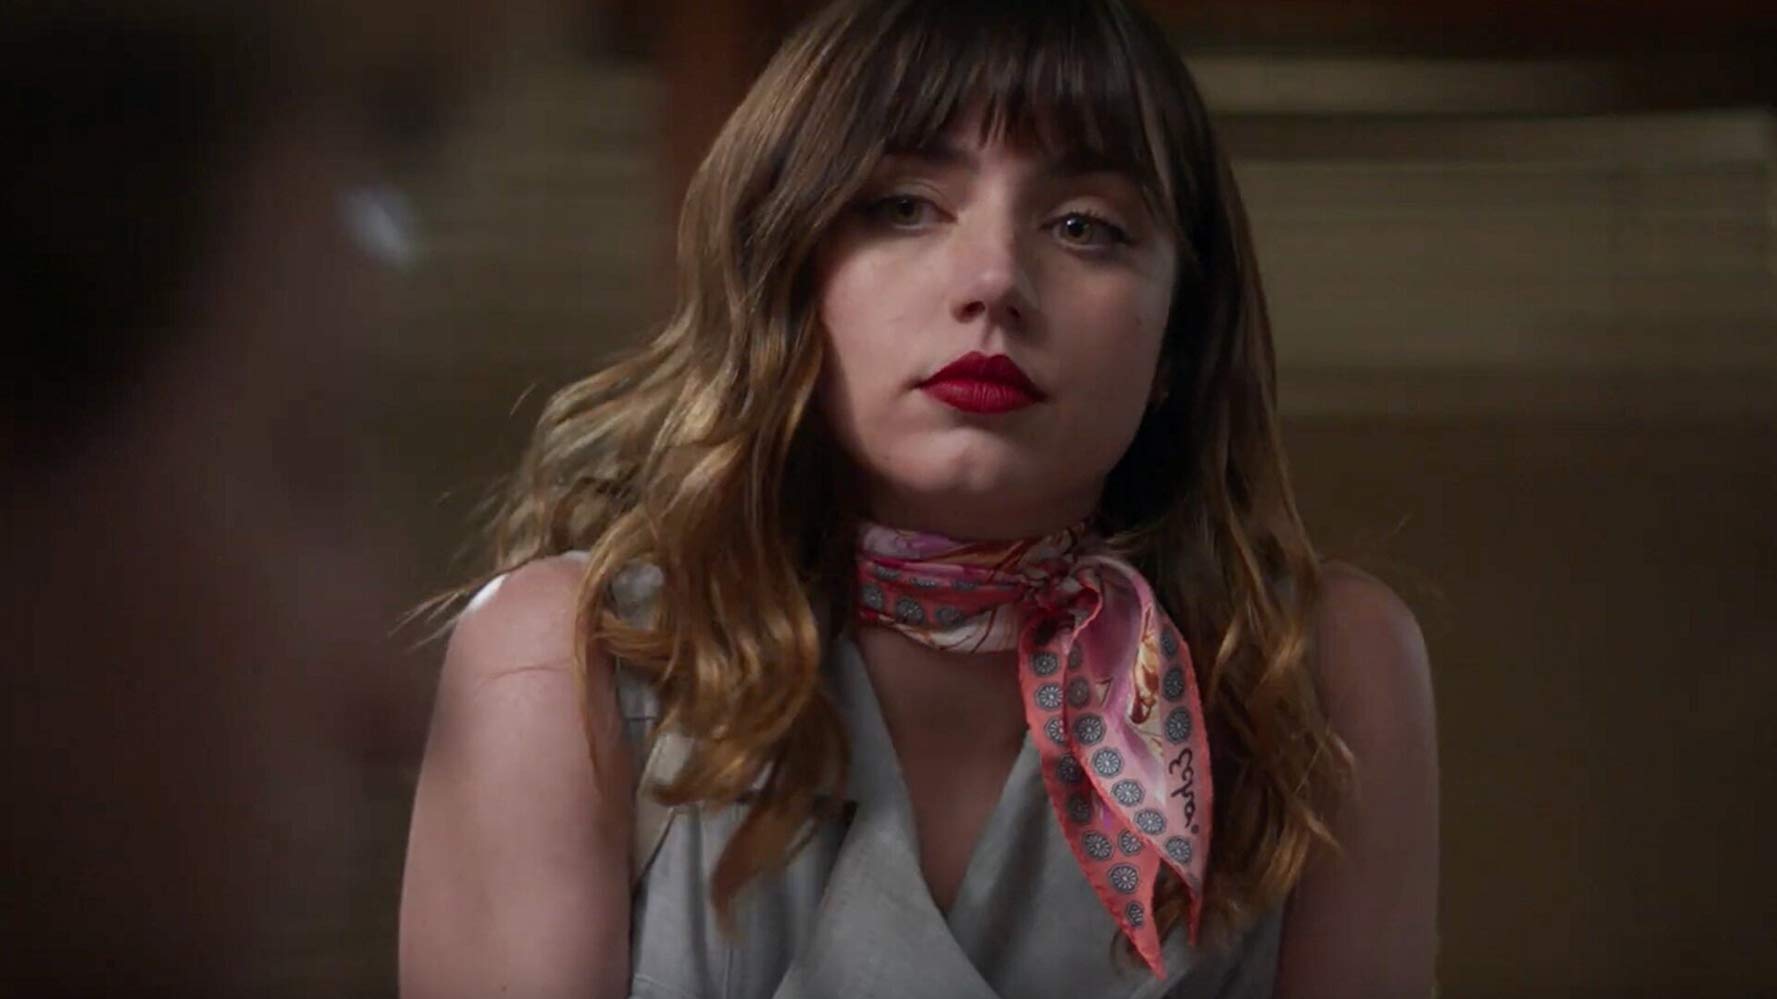 Ghosted Movie Update: Ana de Armas replaces Scarlett Johansson